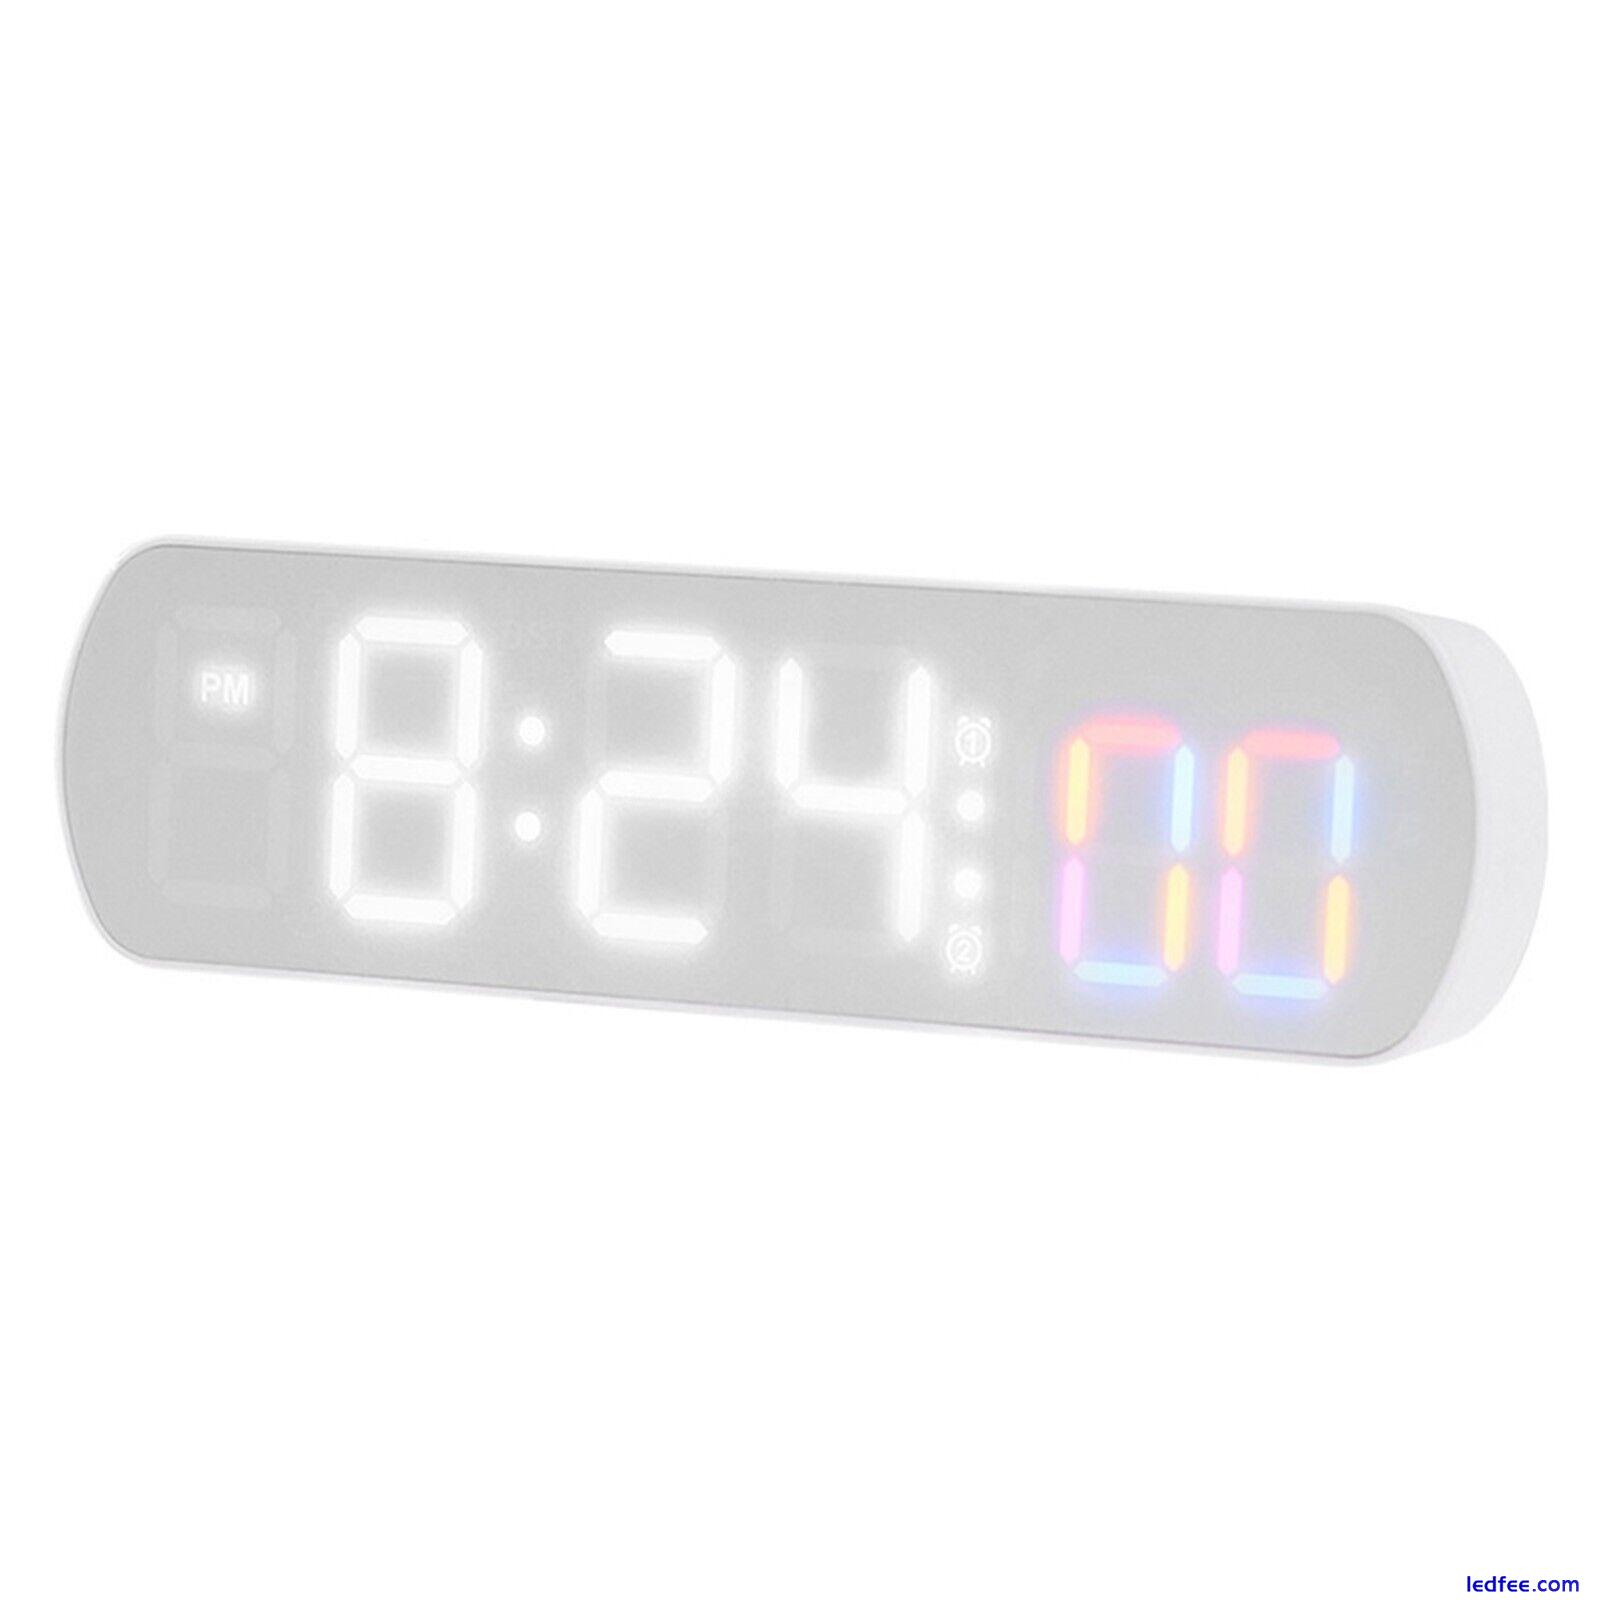 LED Alarm Clock with Countdown/Countdown Function Temperature Humidity Timer 4 